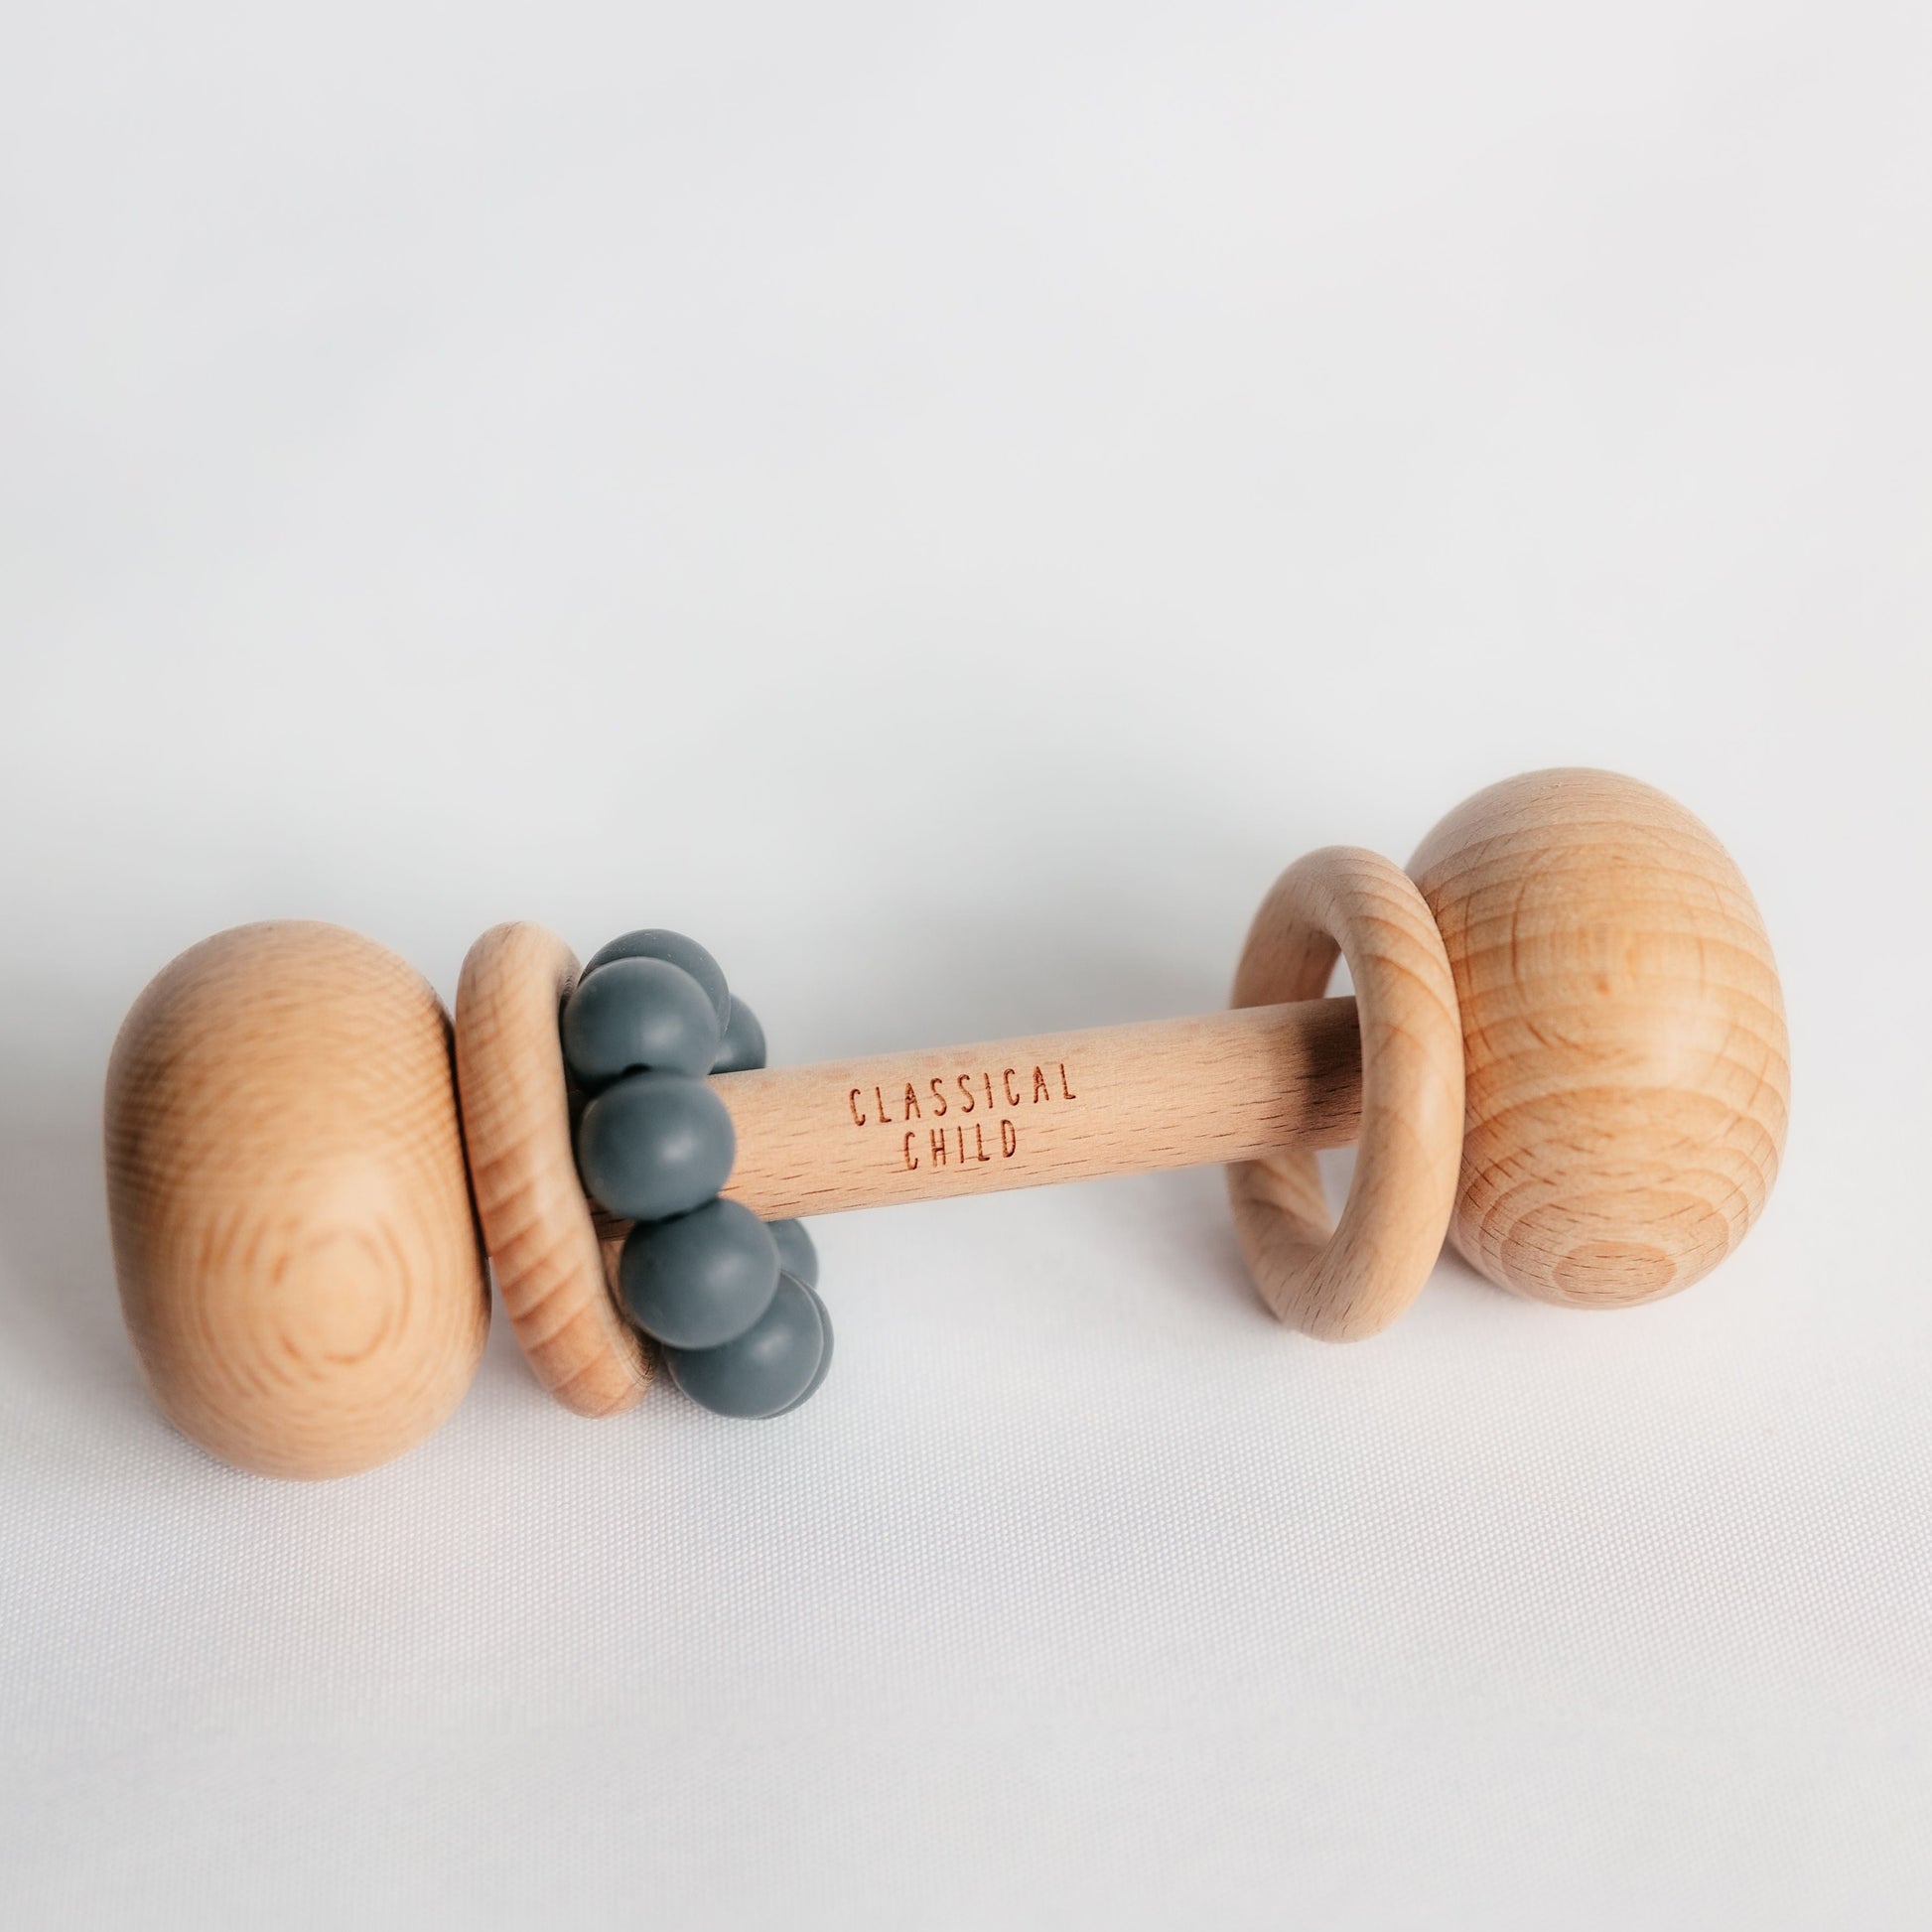 Beech Wood Rattle with Silicone beads